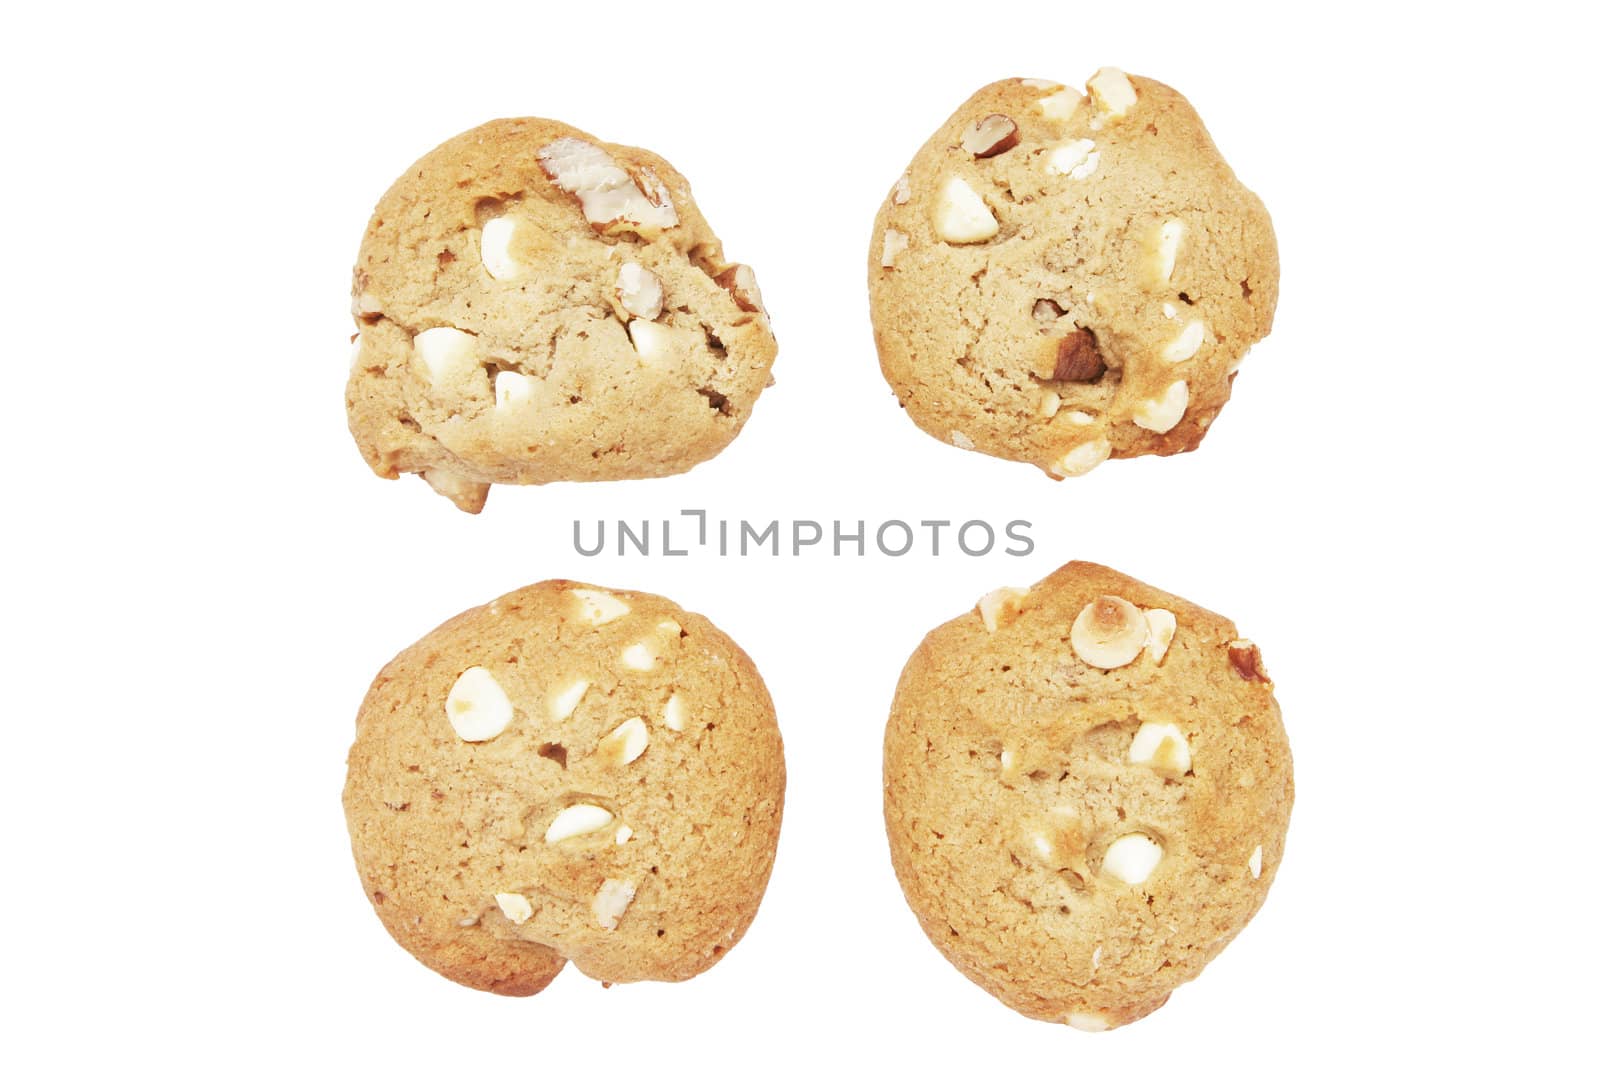 Four Cookie Biscuits With White Chocolate And Nuts by thorsten